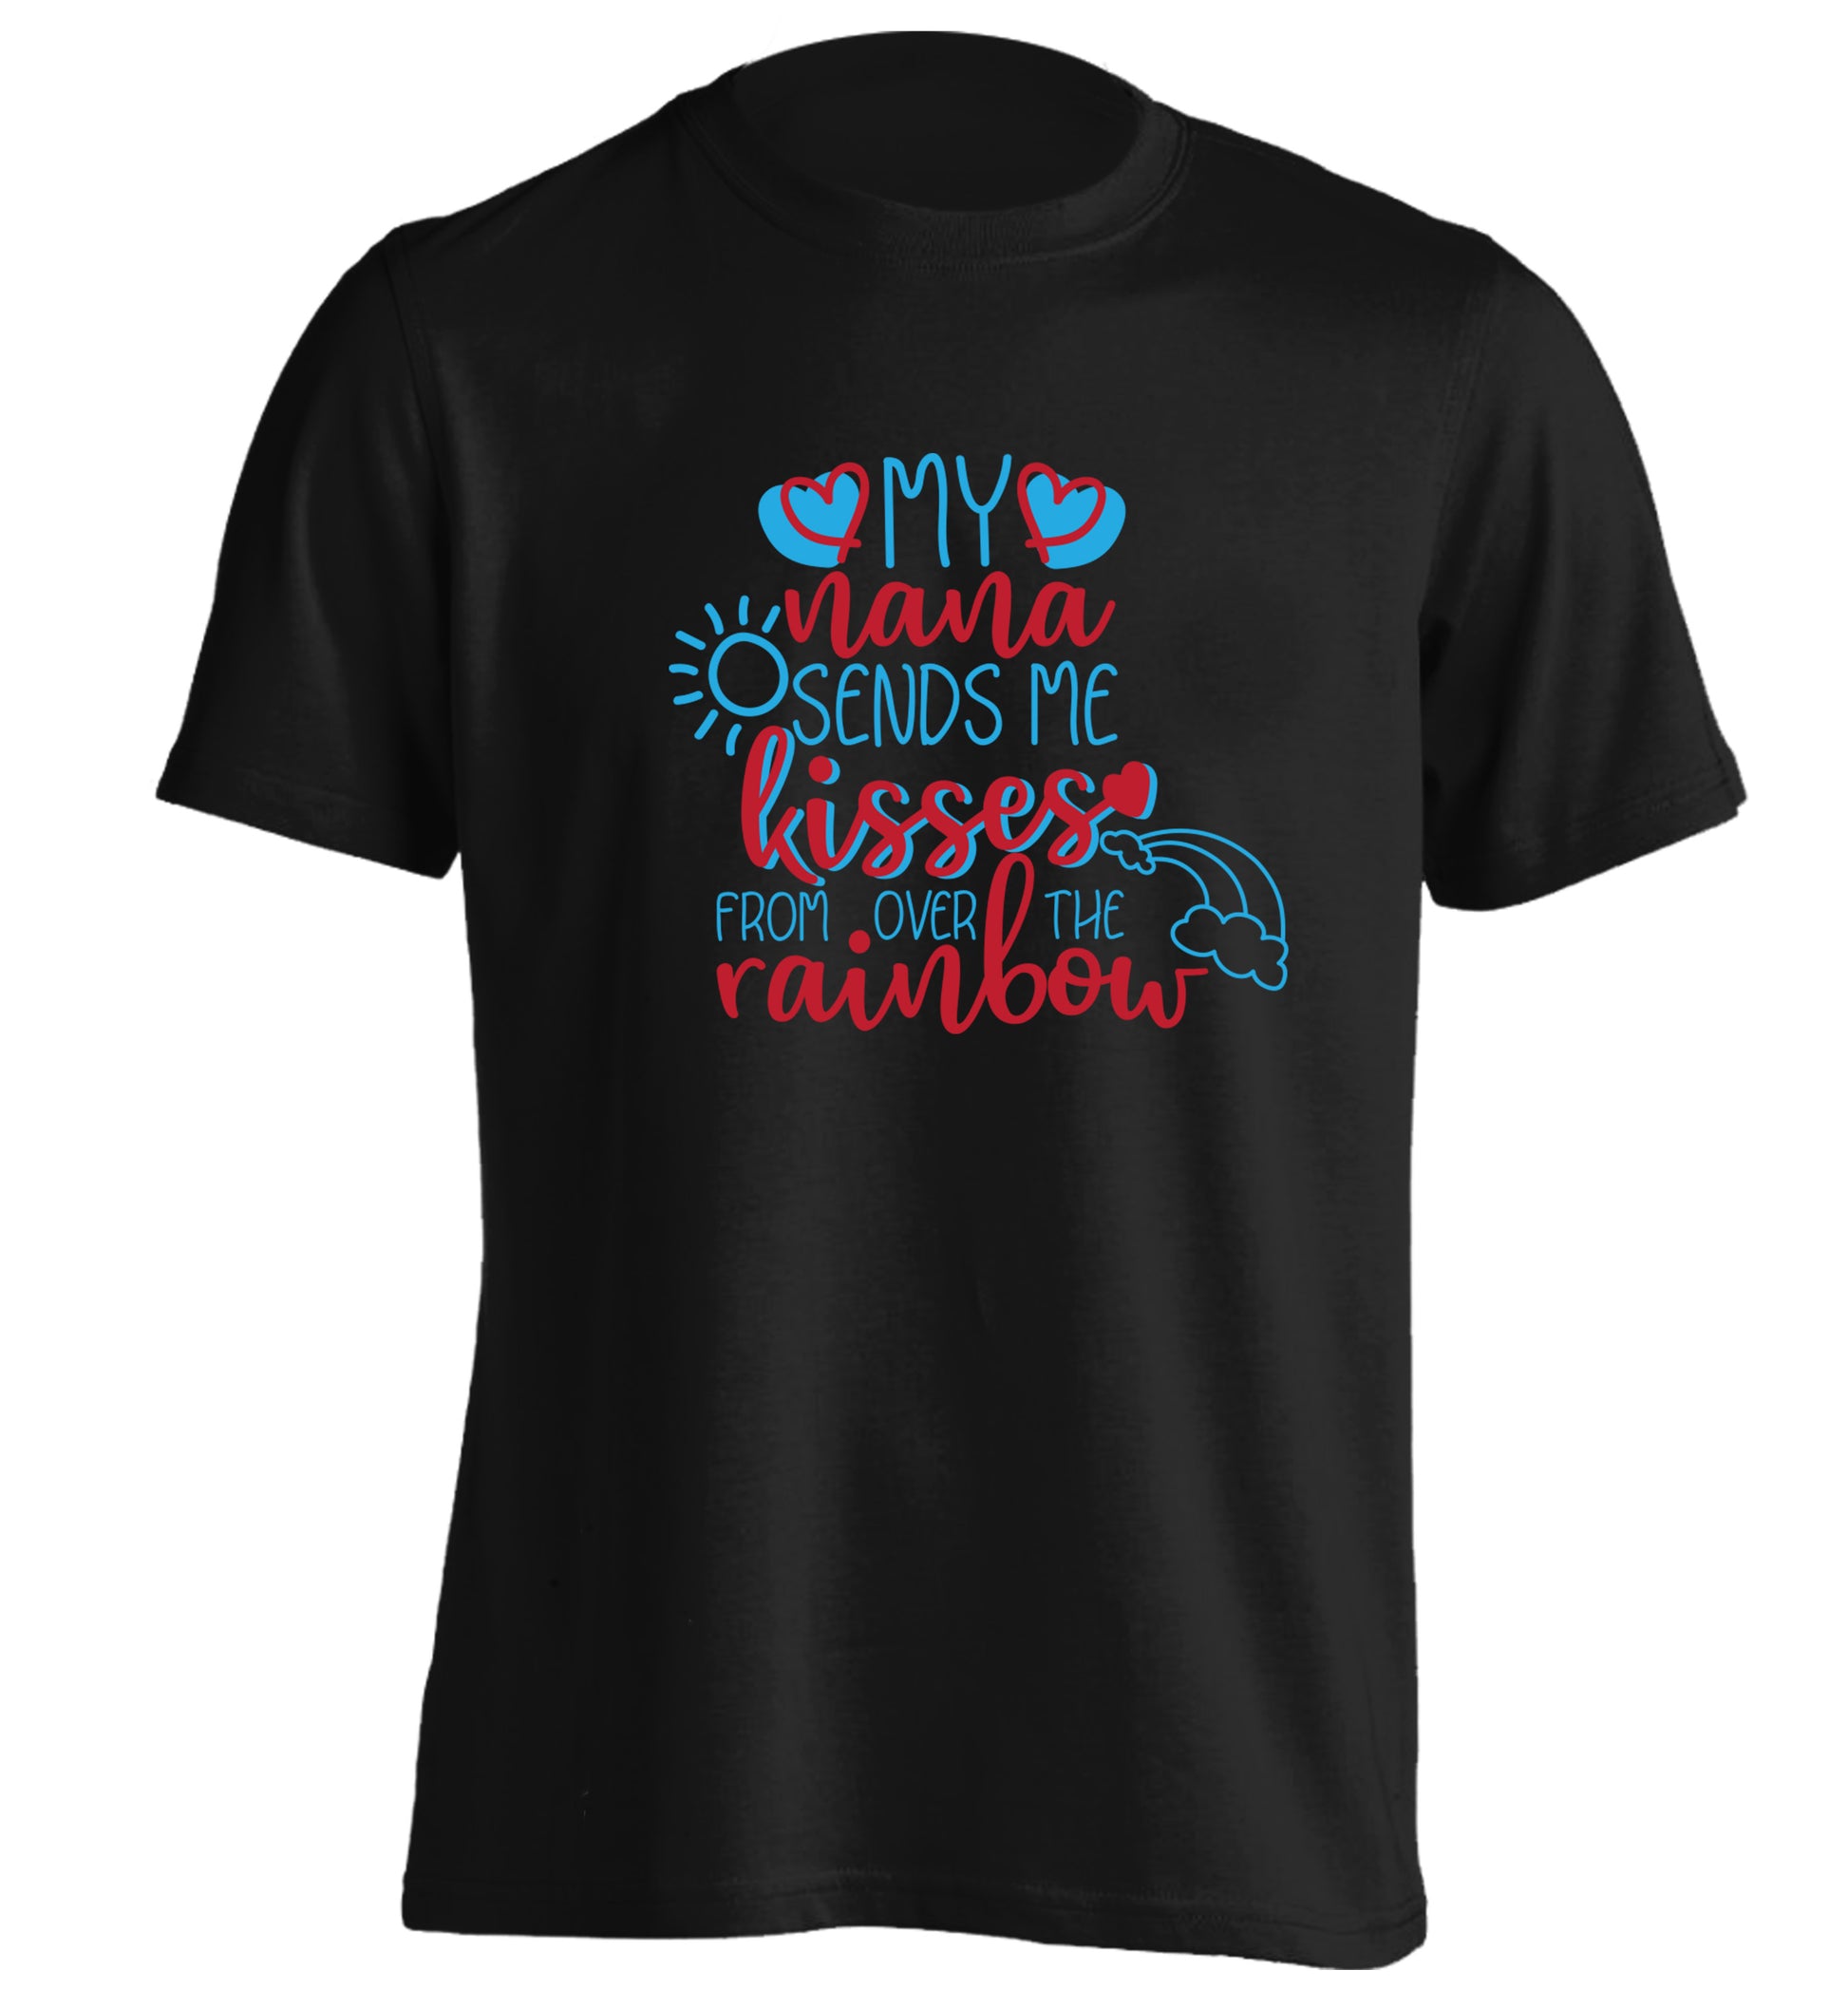 My nana sends me kisses from over the rainbow adults unisex black Tshirt 2XL